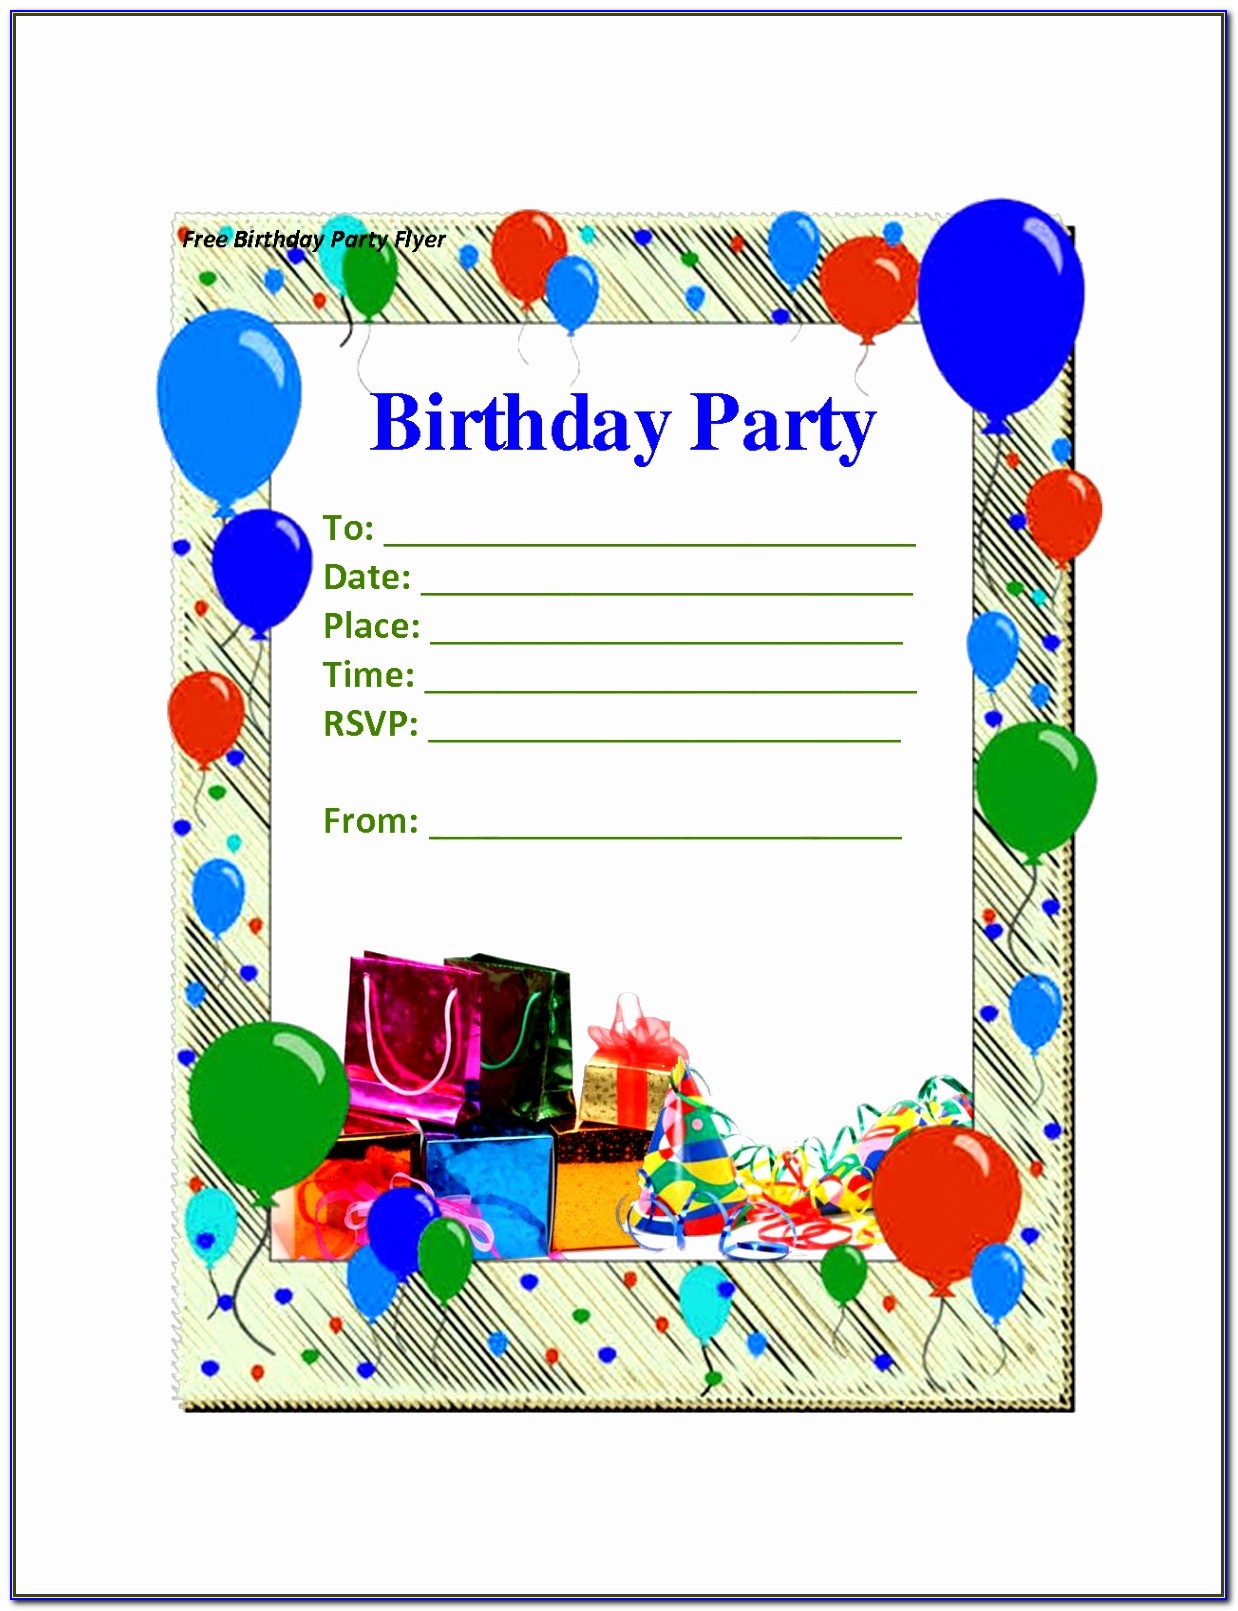 how to make a birthday invitation card in ms word